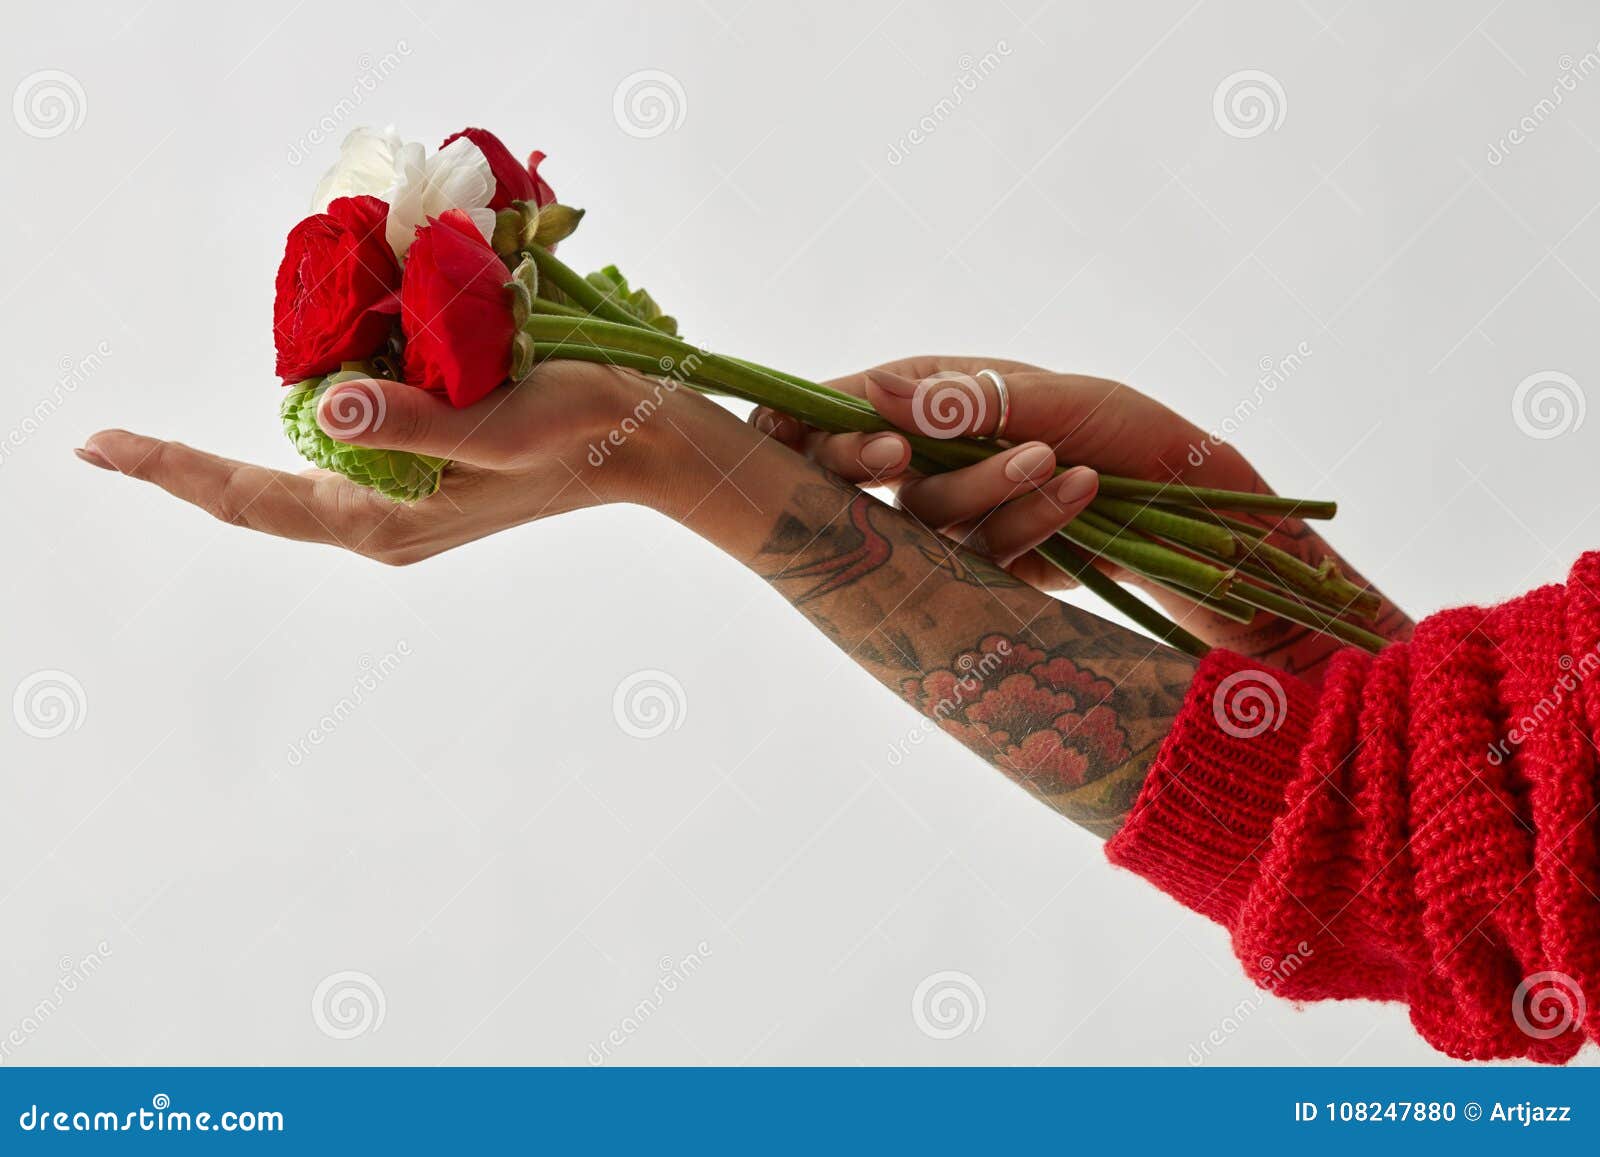 girl with a tattoo on her hands holding a bouquet of flowers stock photo   artjazz 8816592  Stockfresh